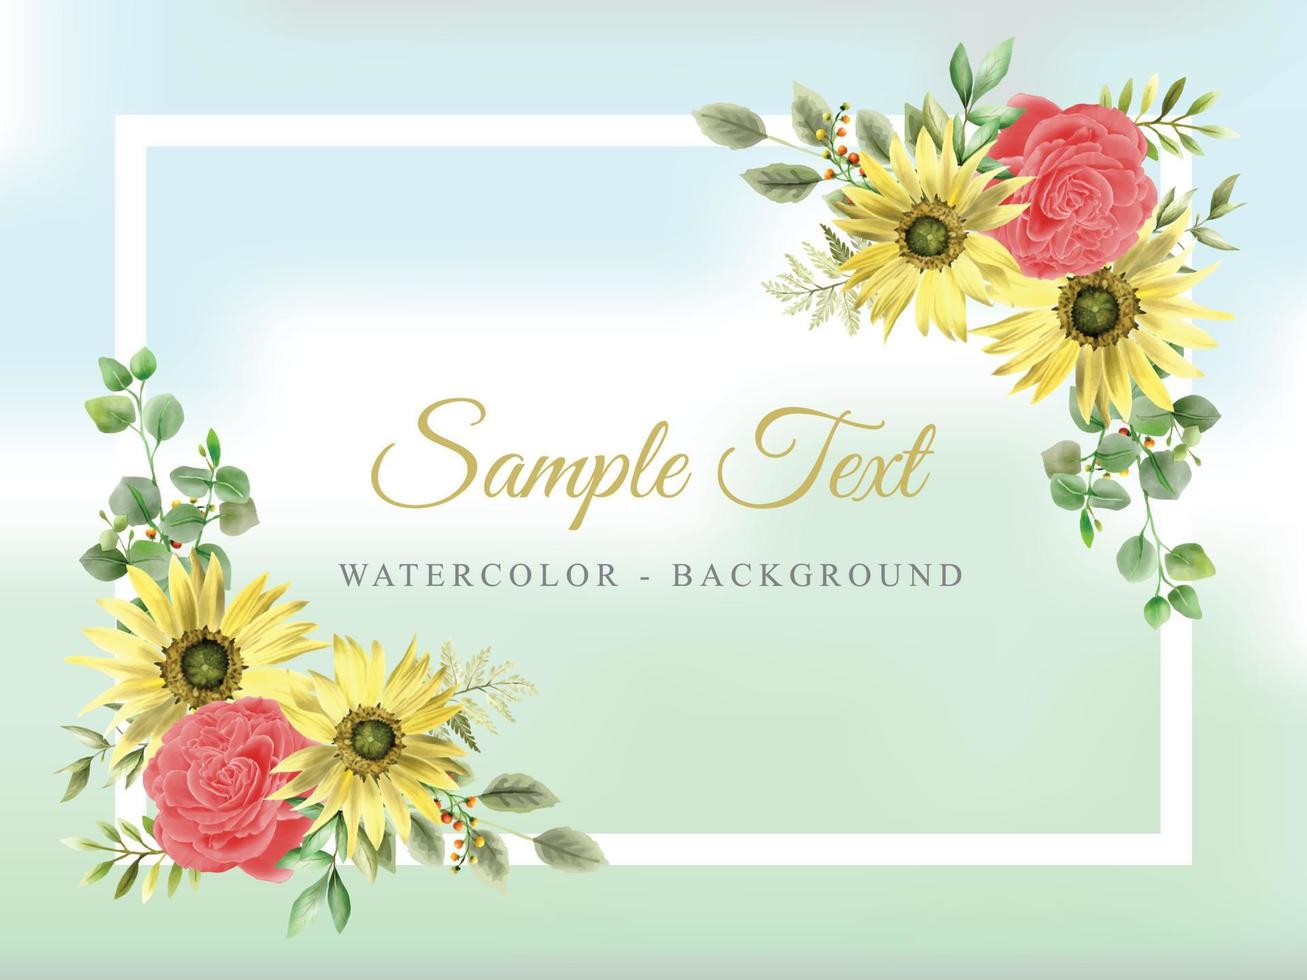 Elegant sunflower and rose watercolor background vector